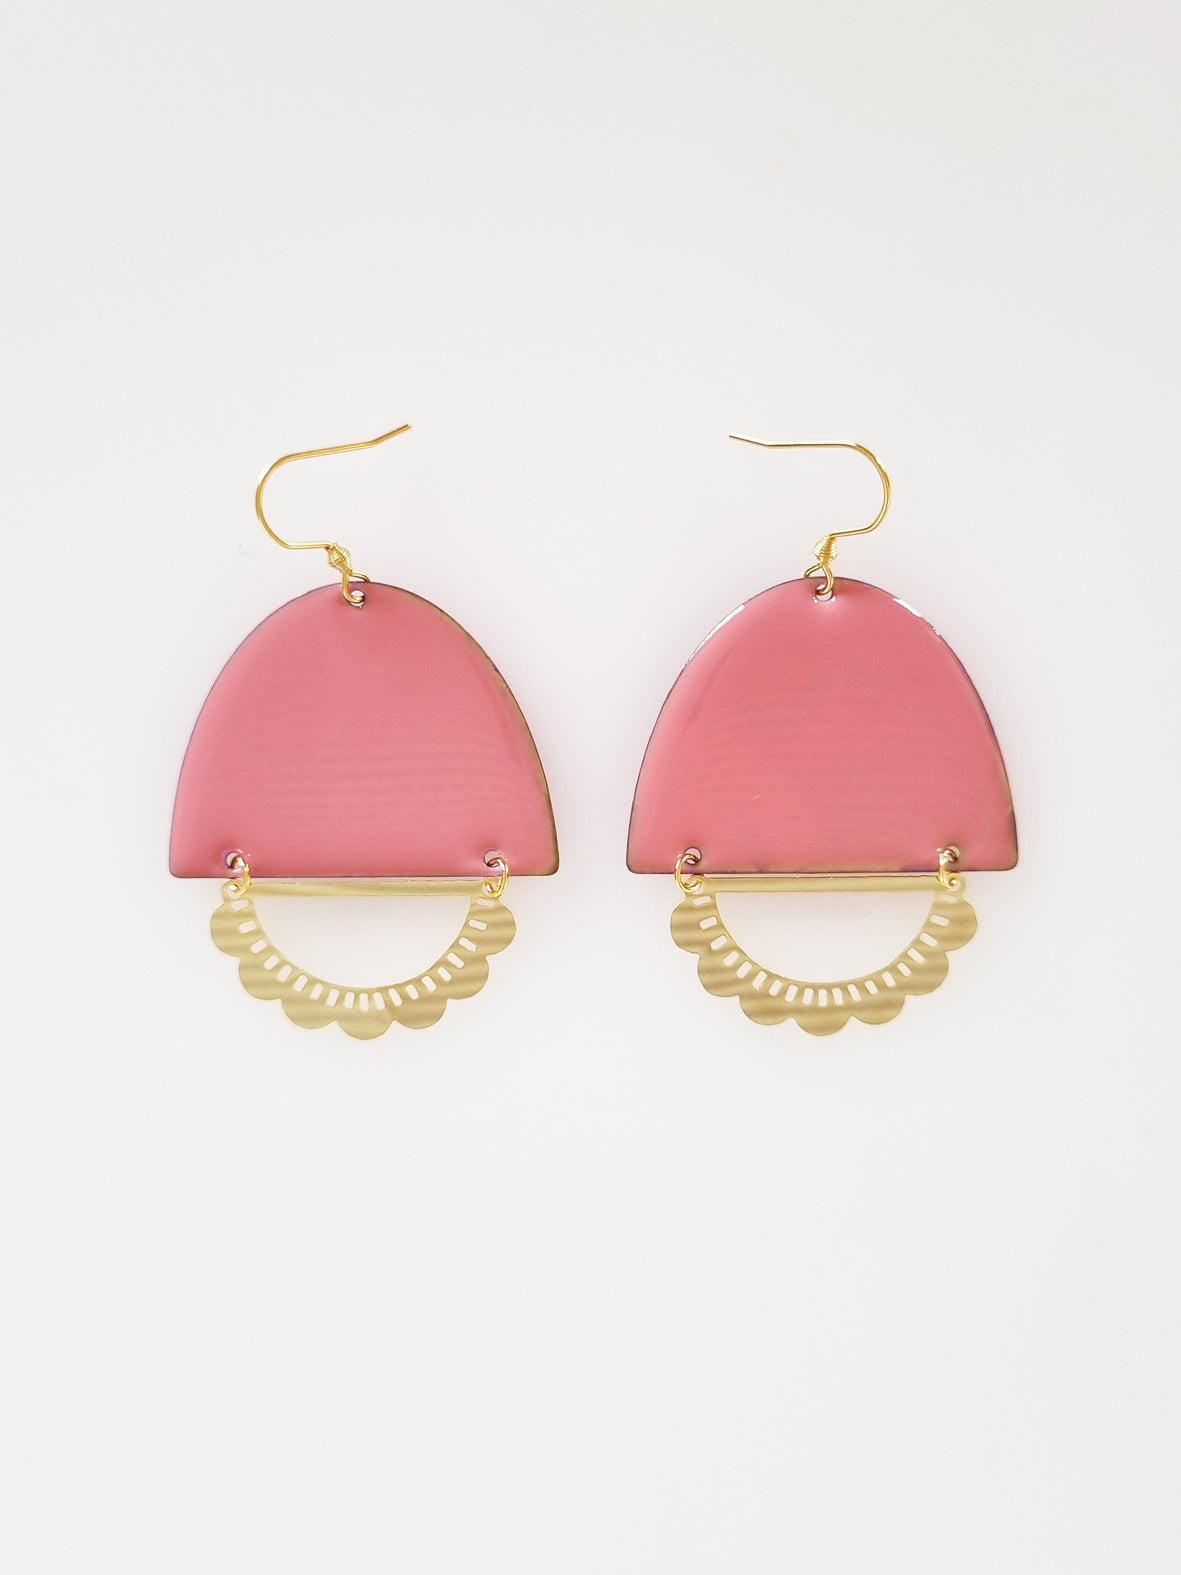 A pair of statement earrings with a hook sit against a white background. They feature a pink enamel arch and a horizontal plated brass D shape with scalloped detail.